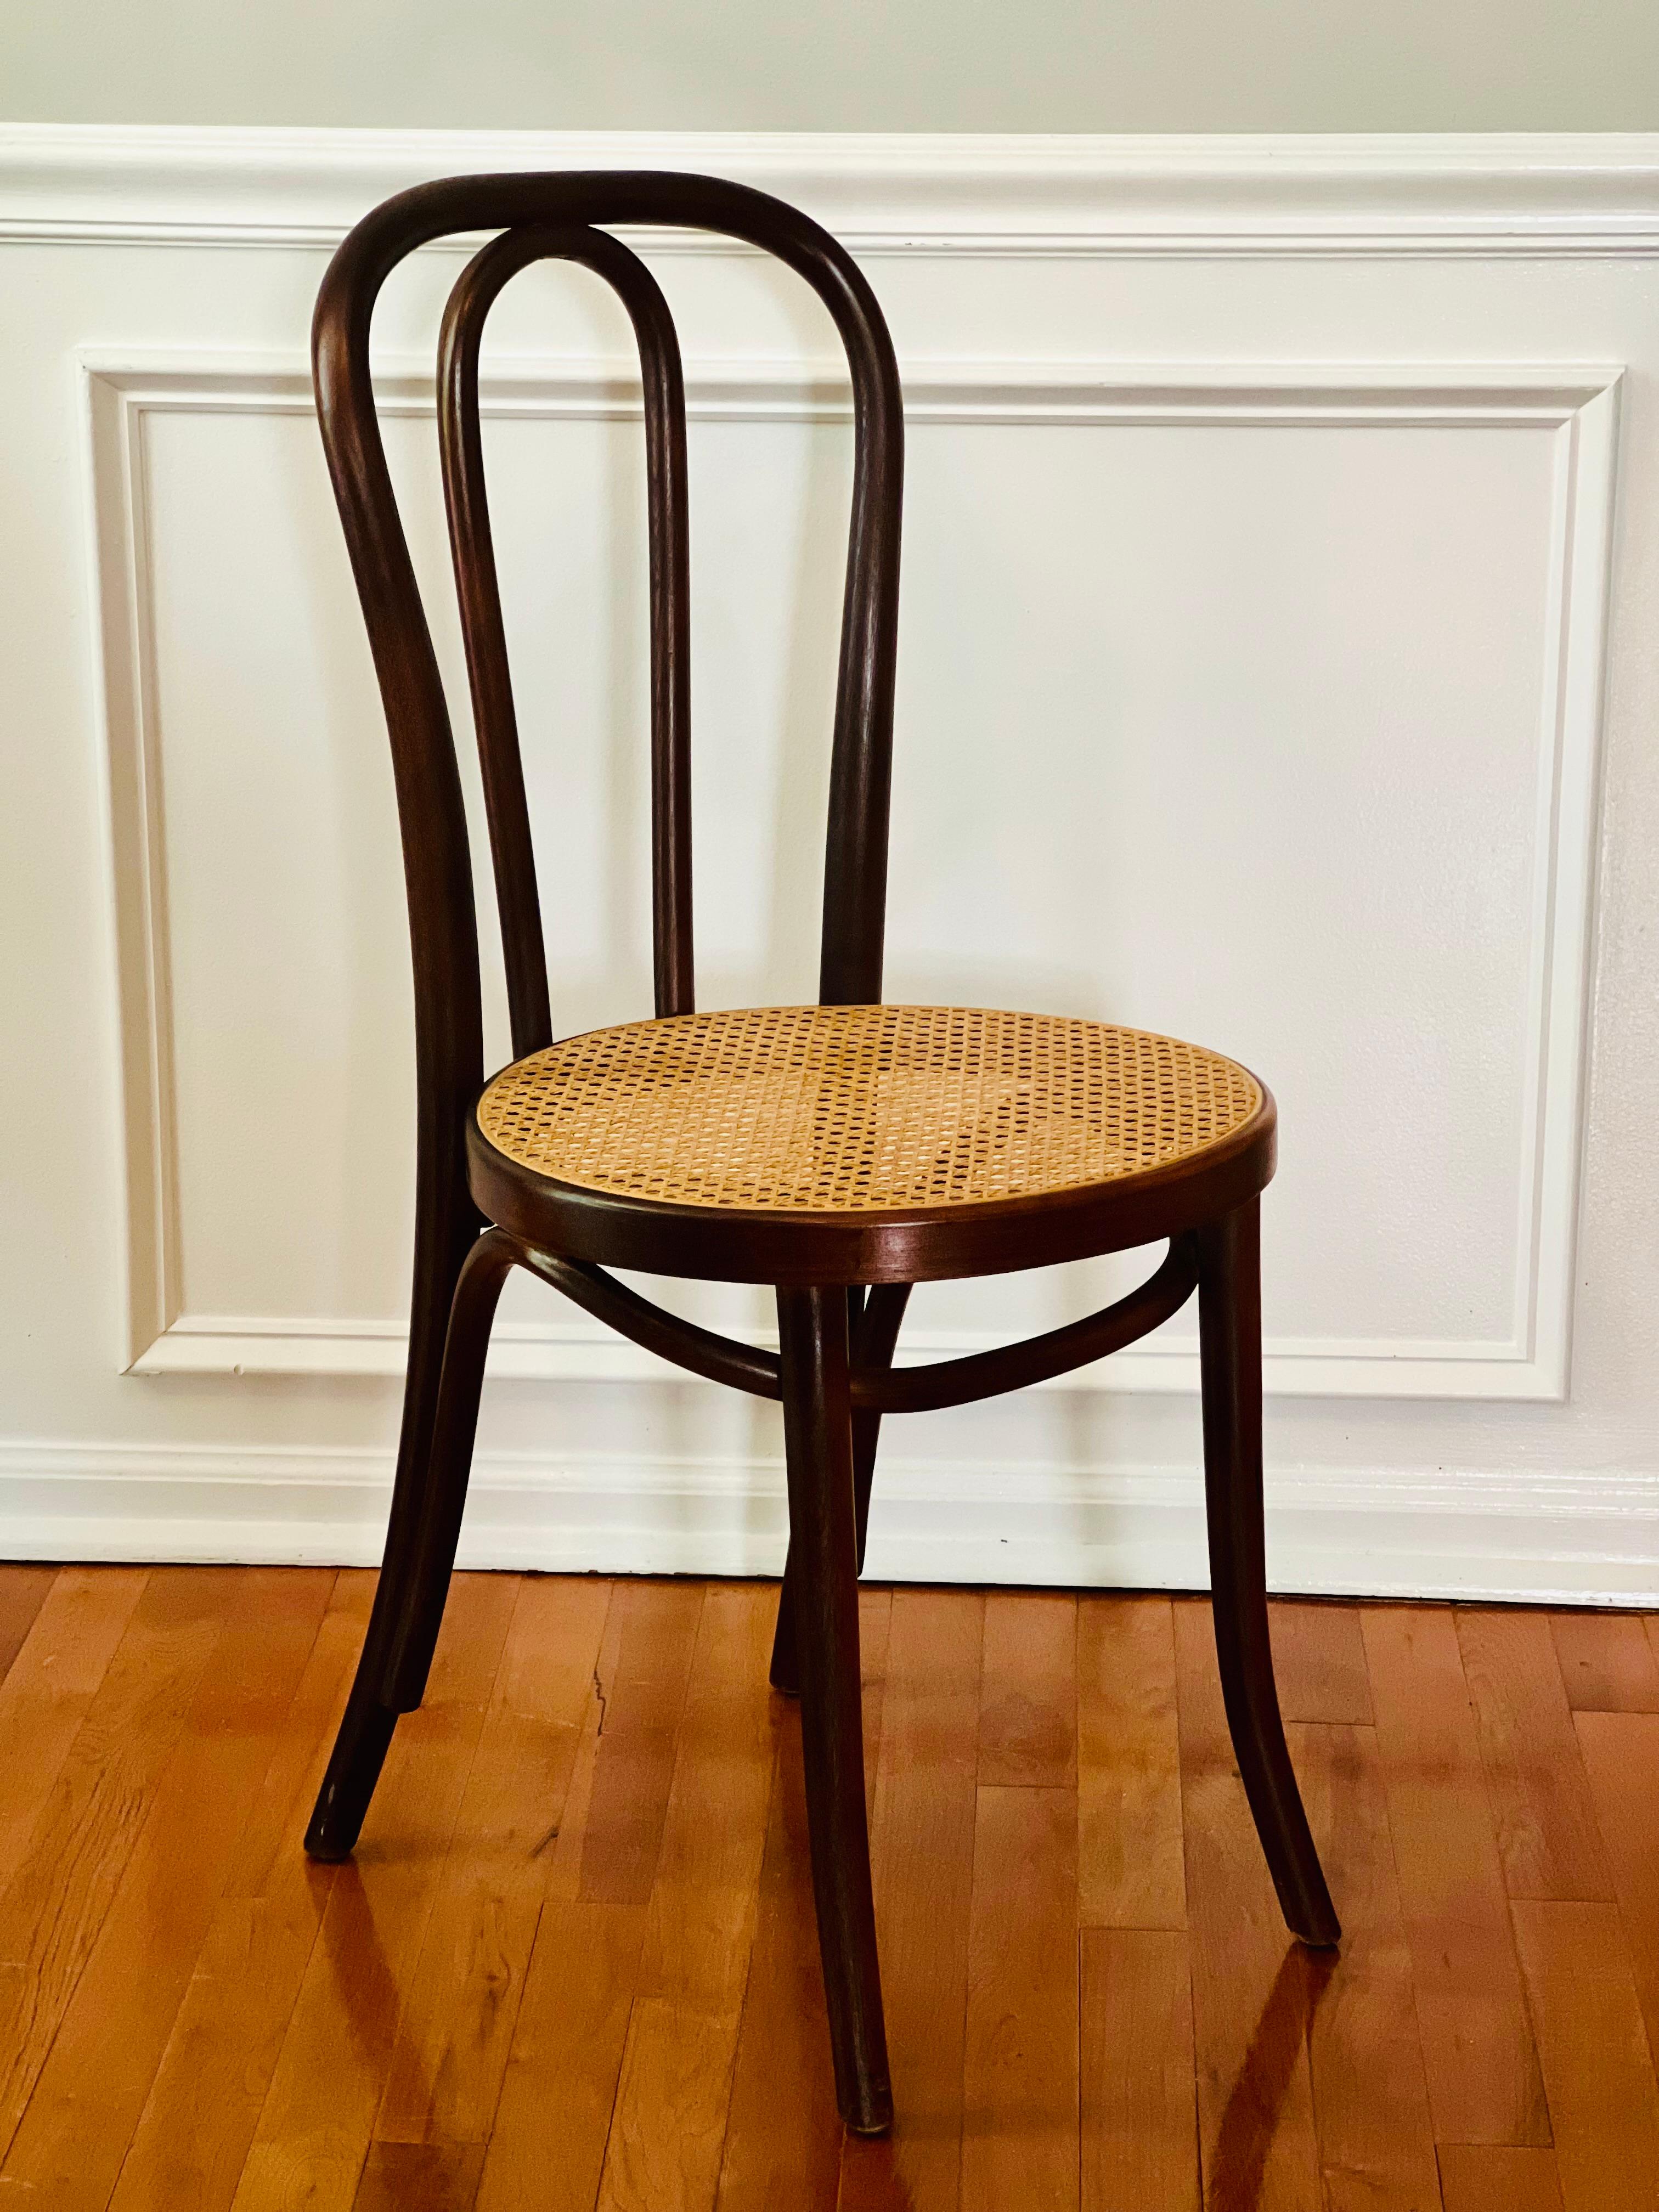 Thonet Bentwood Cane Bistro or Side Chair, 1920's For Sale 8